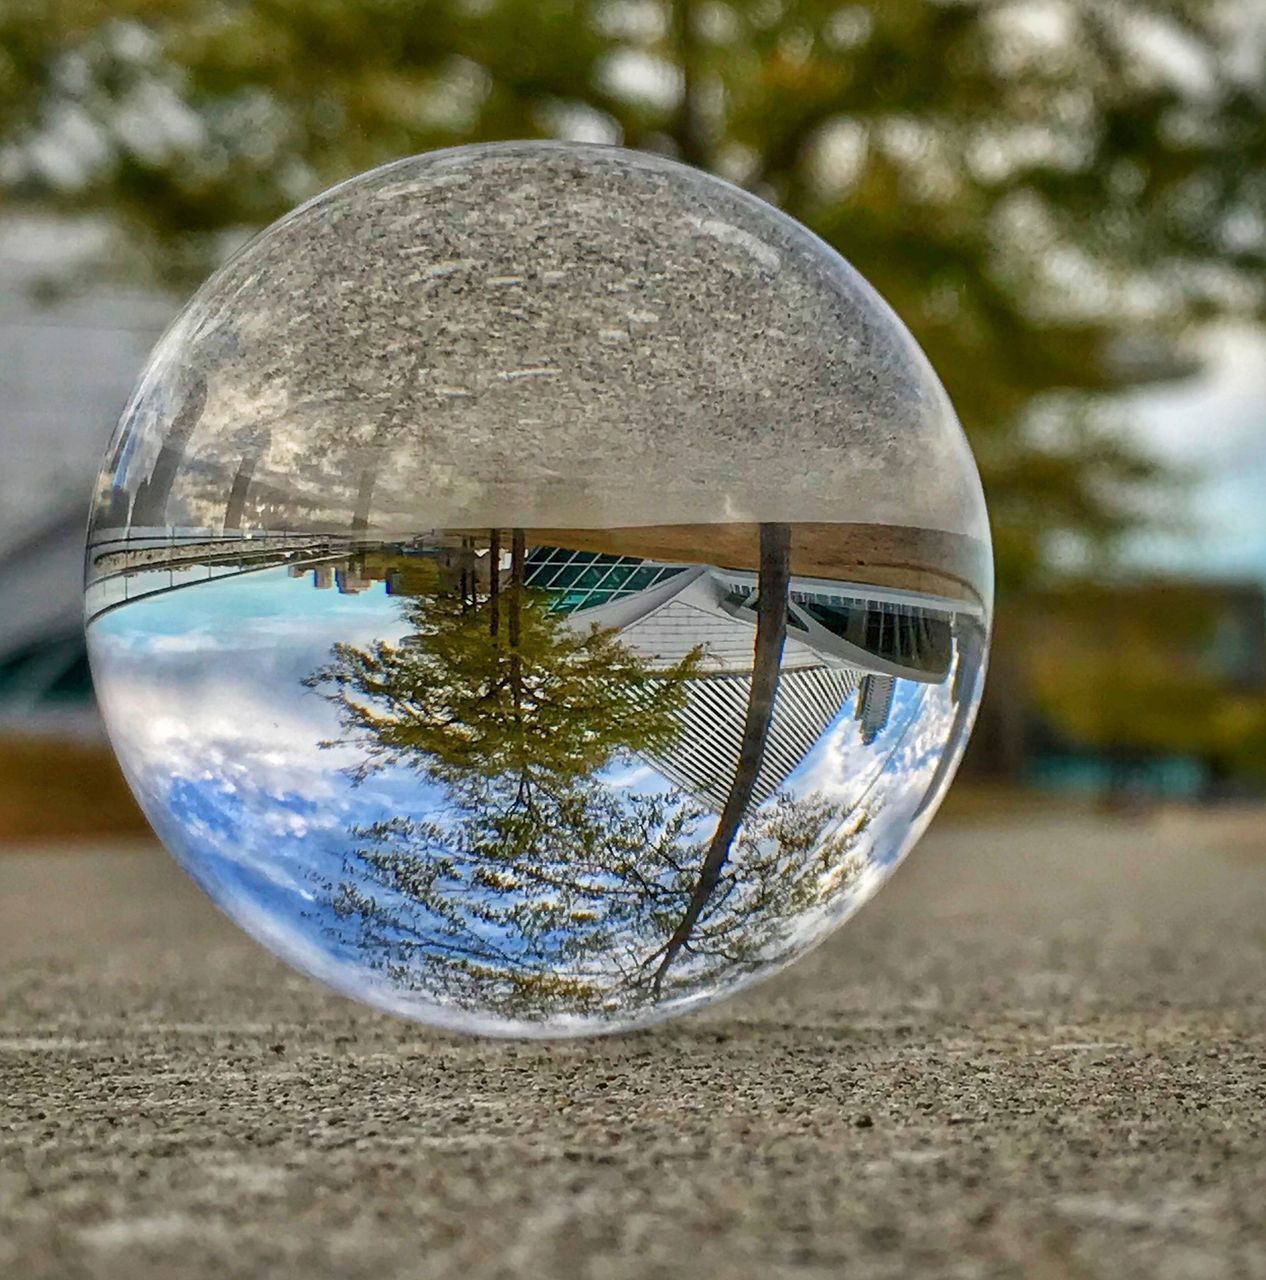 CLOSE-UP OF CRYSTAL BALL ON WATER